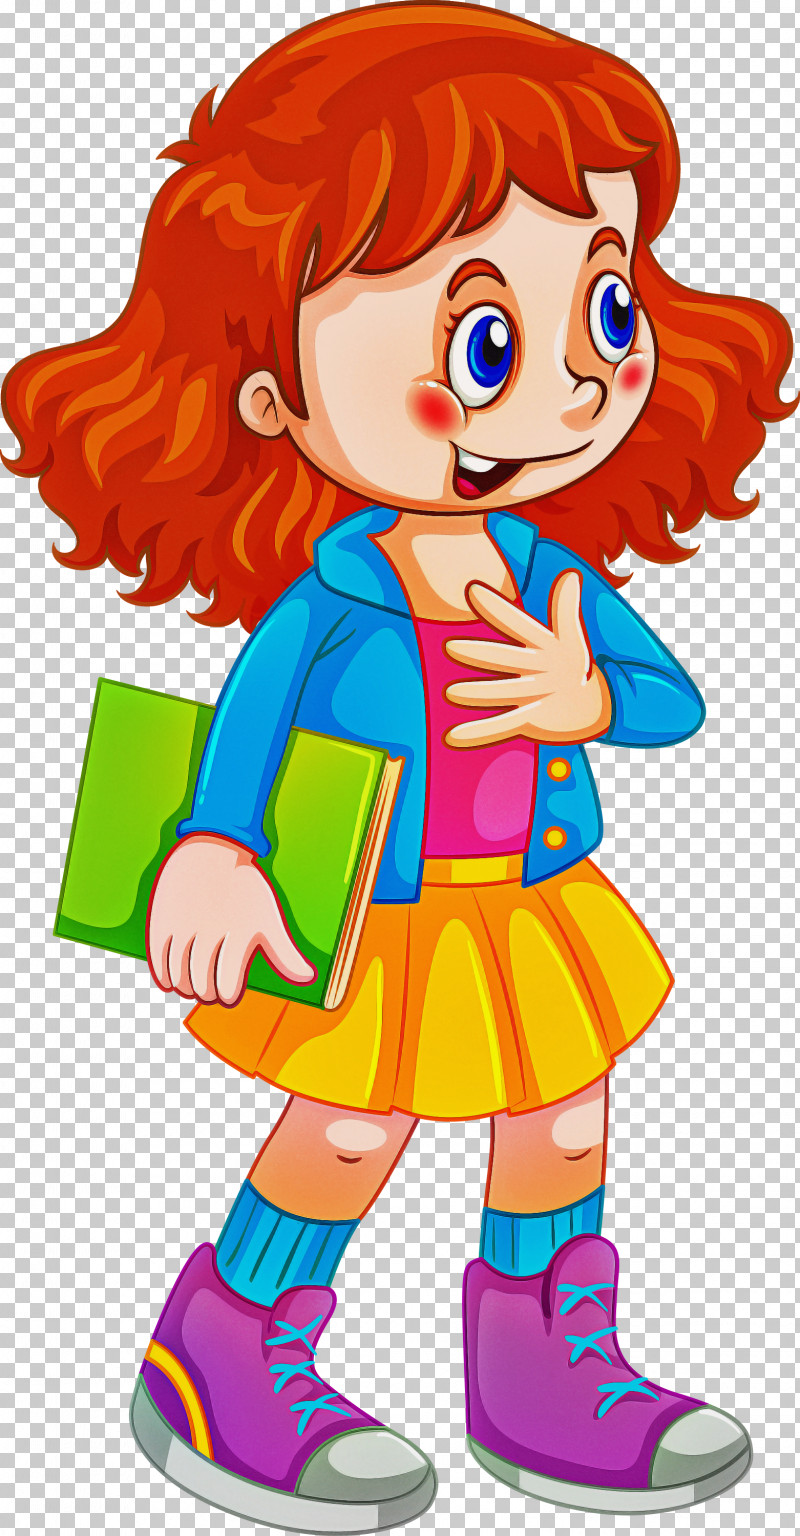 Girl Student Book PNG, Clipart, Book, Cartoon, Girl, Student, Walking Free PNG Download